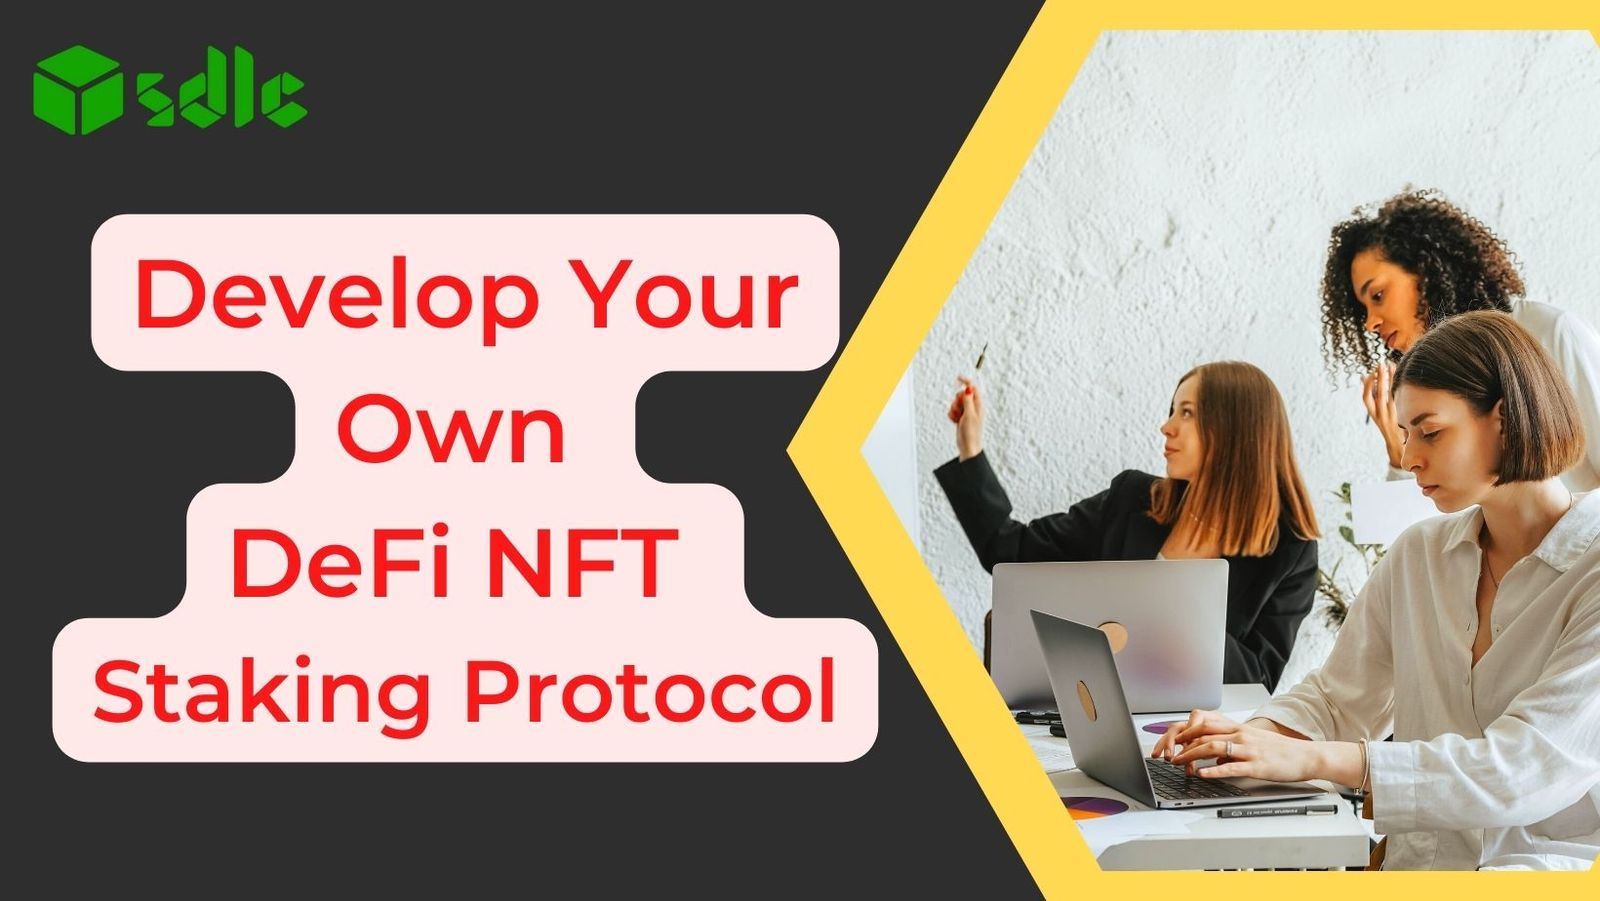 How to Develop Own DeFi NFT Staking Protocol?